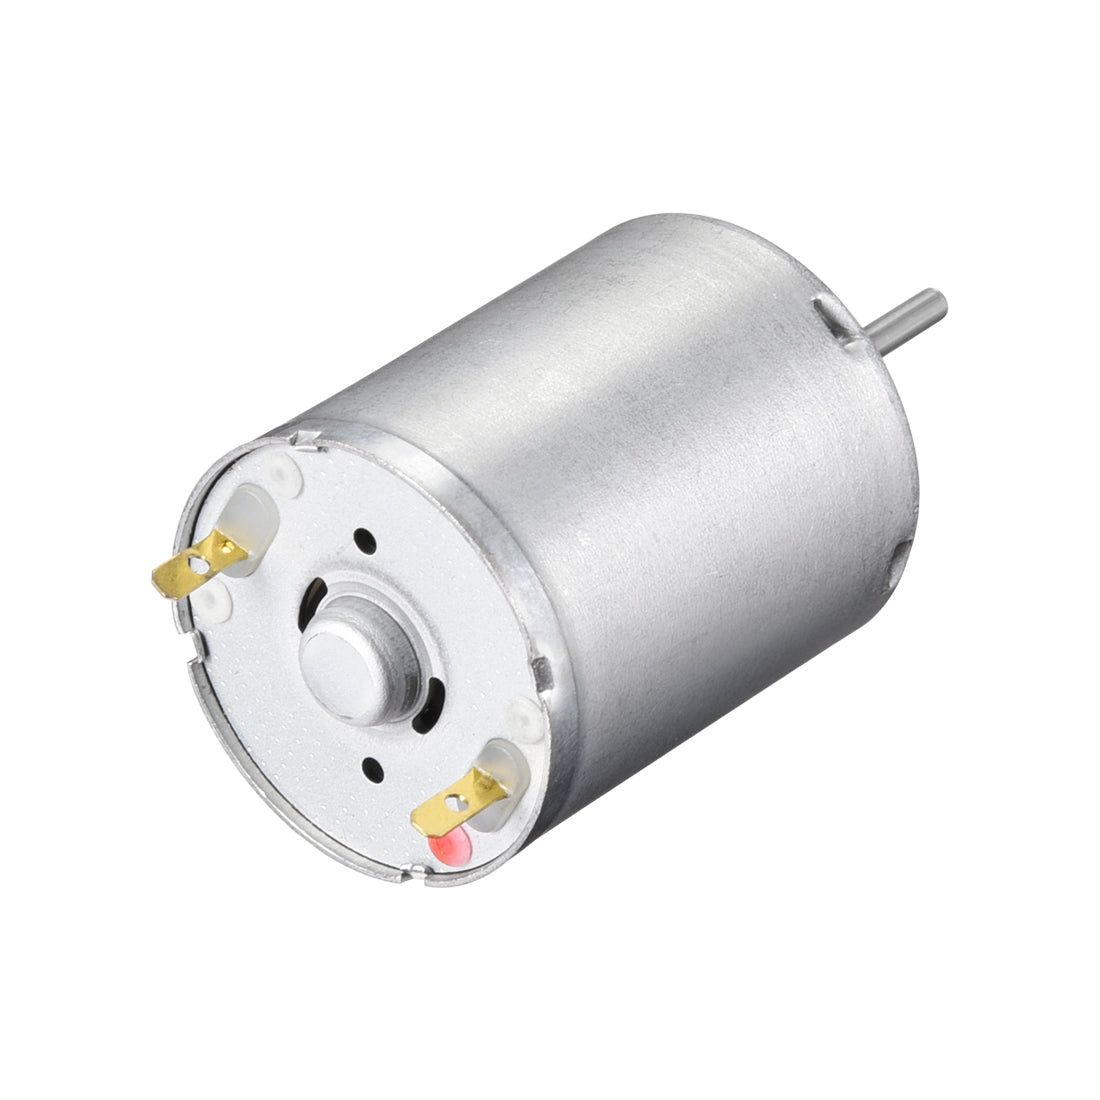 uxcell Uxcell Micro Motor DC 12V 11600-12000RPM High Speed Motor for DIY RC Cars Remote Control